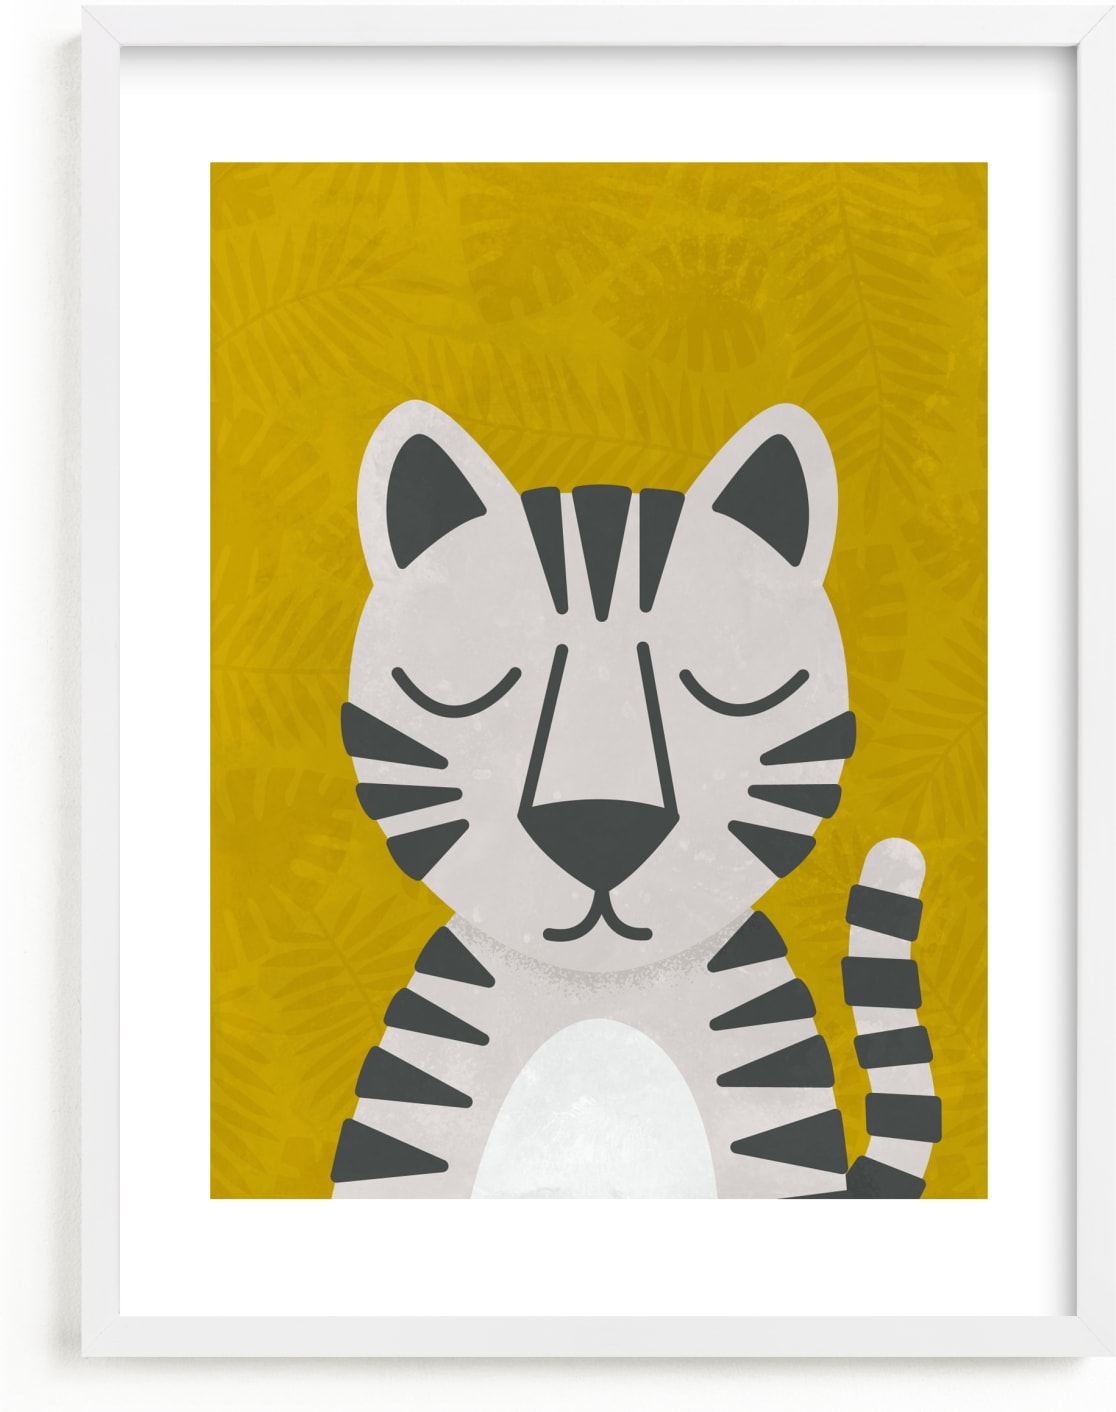 This is a yellow kids wall art by 2birdstone called White Bengal Tiger.